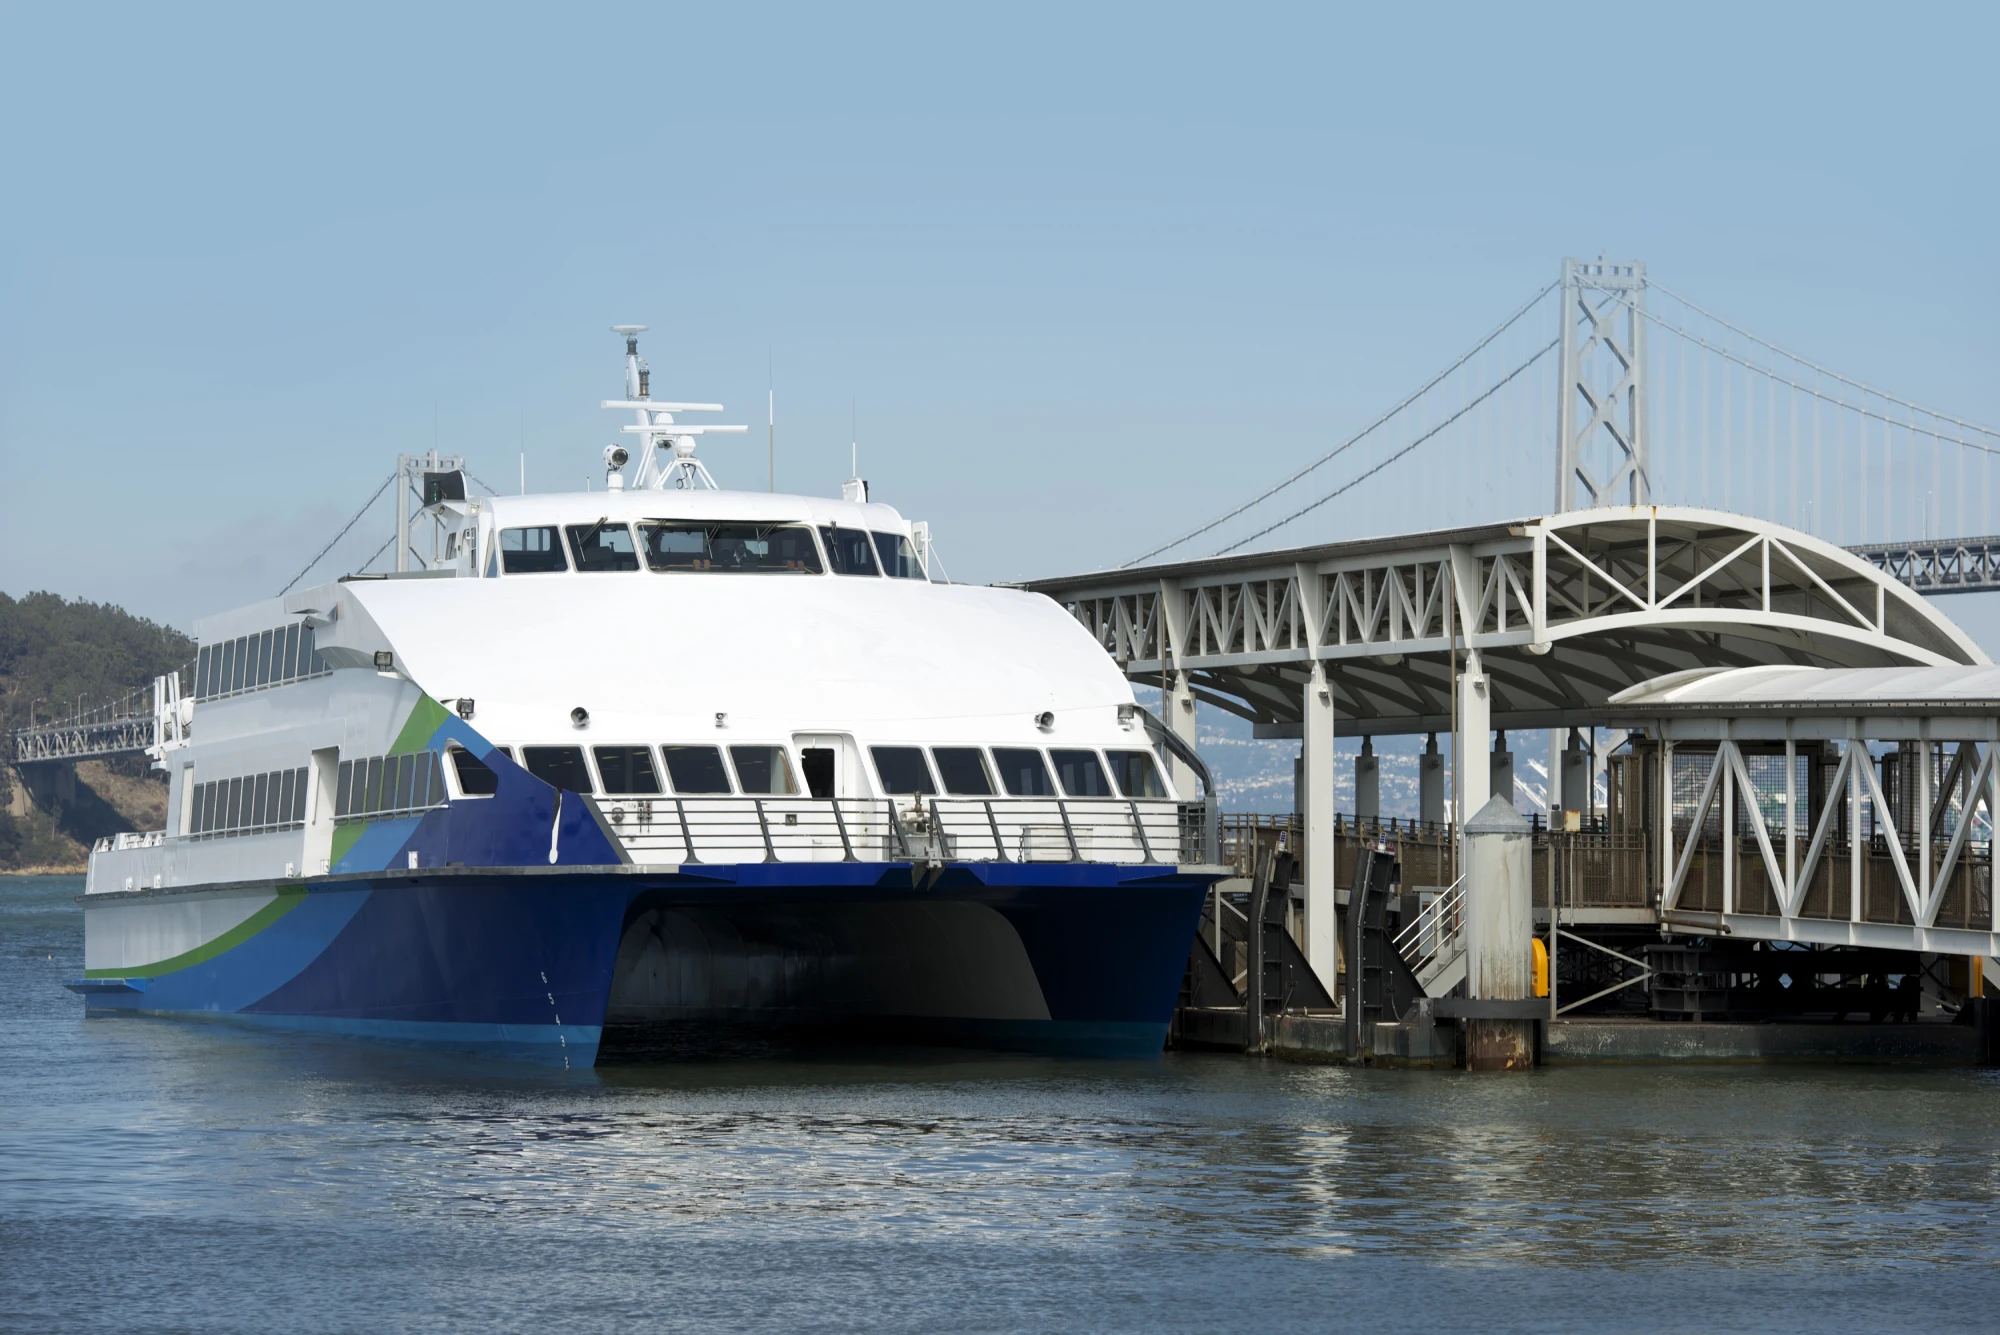 A ferry vessel owned by San Francisco Bay Ferry docks at a pier at the San Francisco Ferry Building. The boat has a primarily white hull with the accent colors of green and blue. It has two passenger decks with windows on each. In the background is the Bay Bridge.